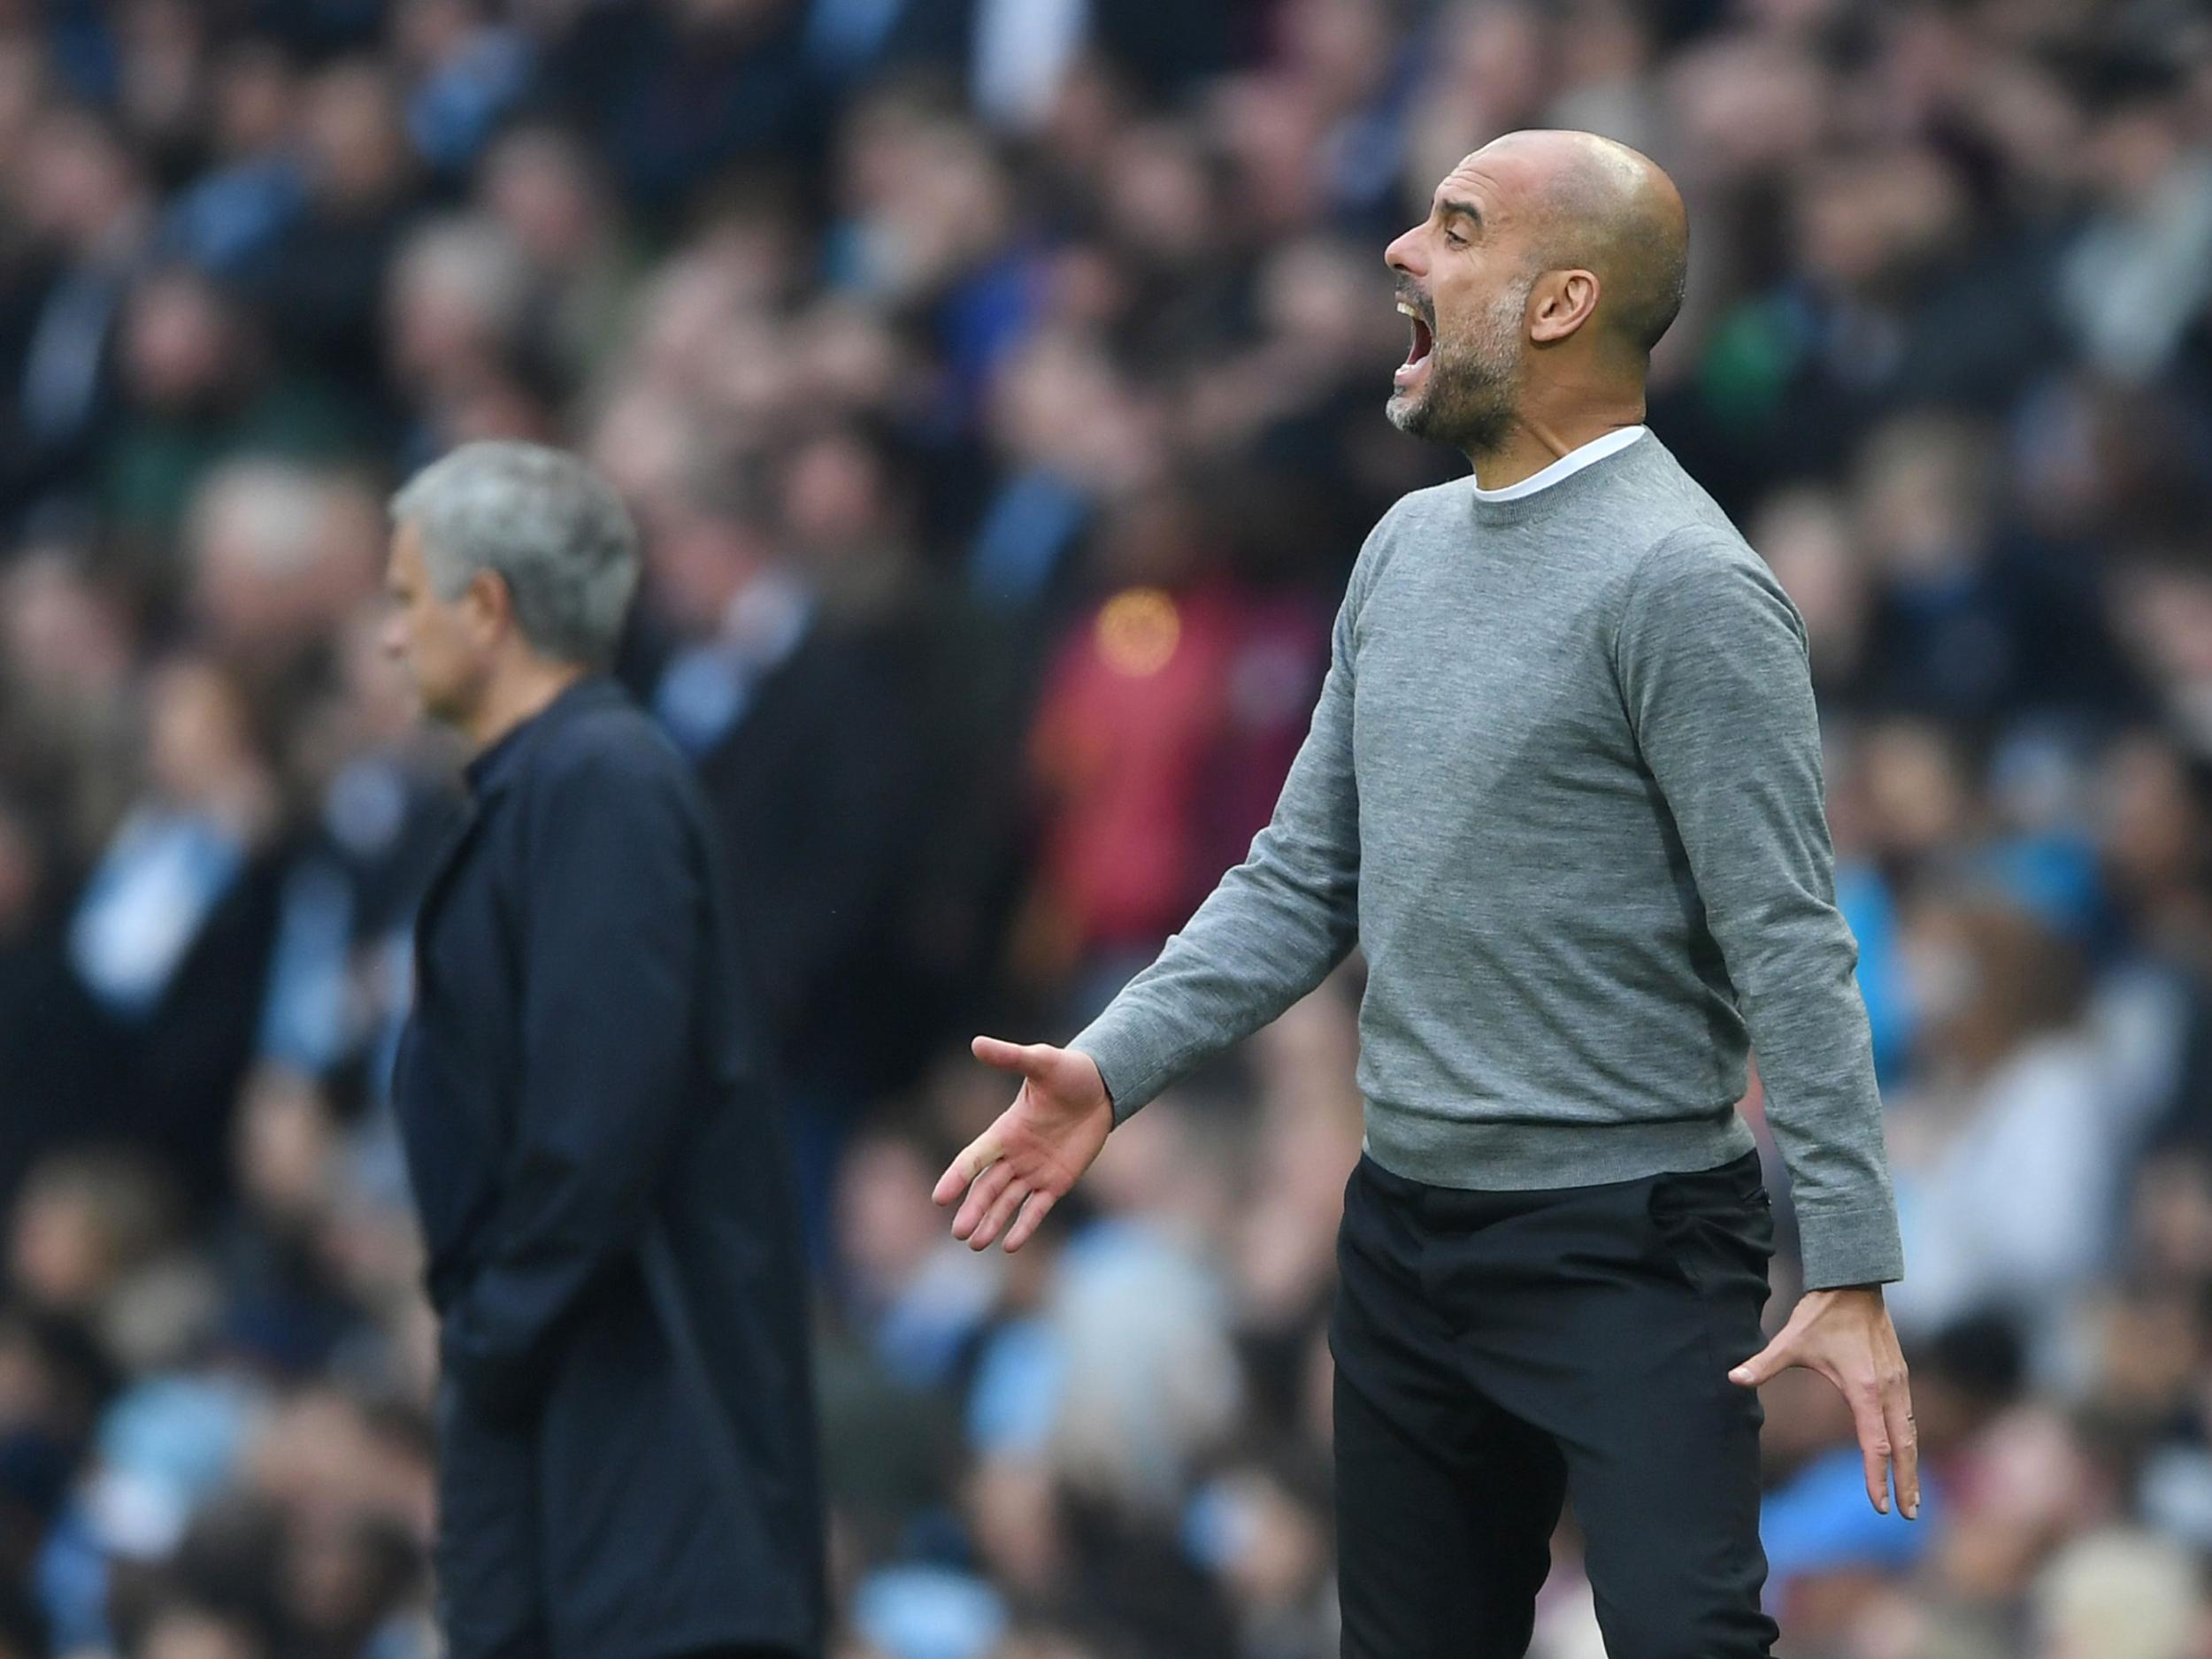 Pep Guardiola saw his side defeated by Manchester United last weekend